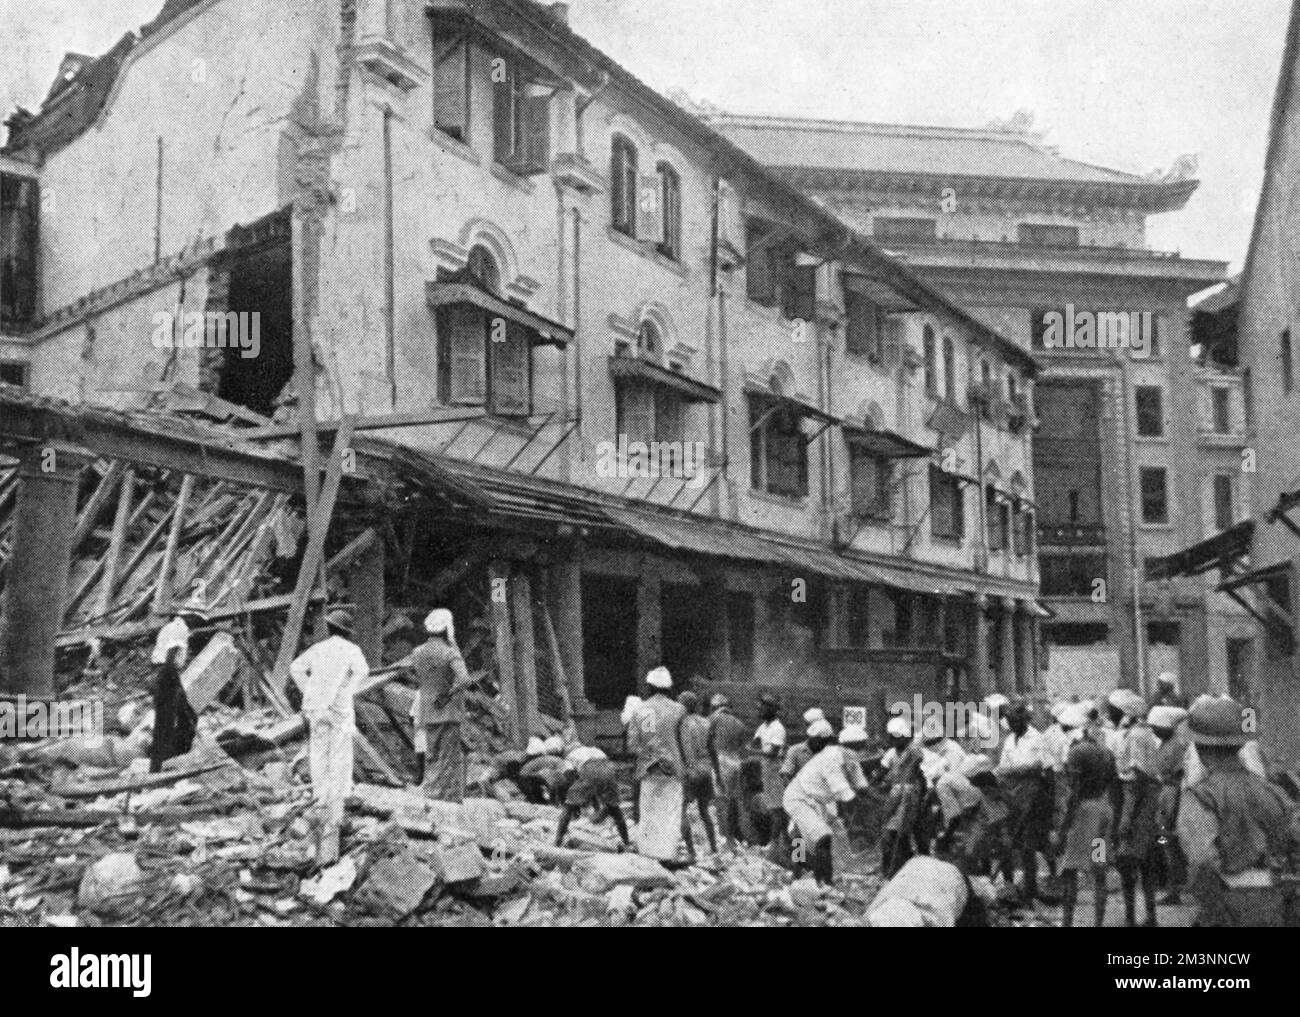 Following the capture of Malaya at the end of 1941, Japanese forces turned their attention to Singapore, a short distance away from the aerodromes they now held. Bombing raids on Singapore followed, and here the local population are seen clearing up debris following one such raid. Singapore was surrendered to the Japanese on 15 February 1942     Date: January 1942 Stock Photo